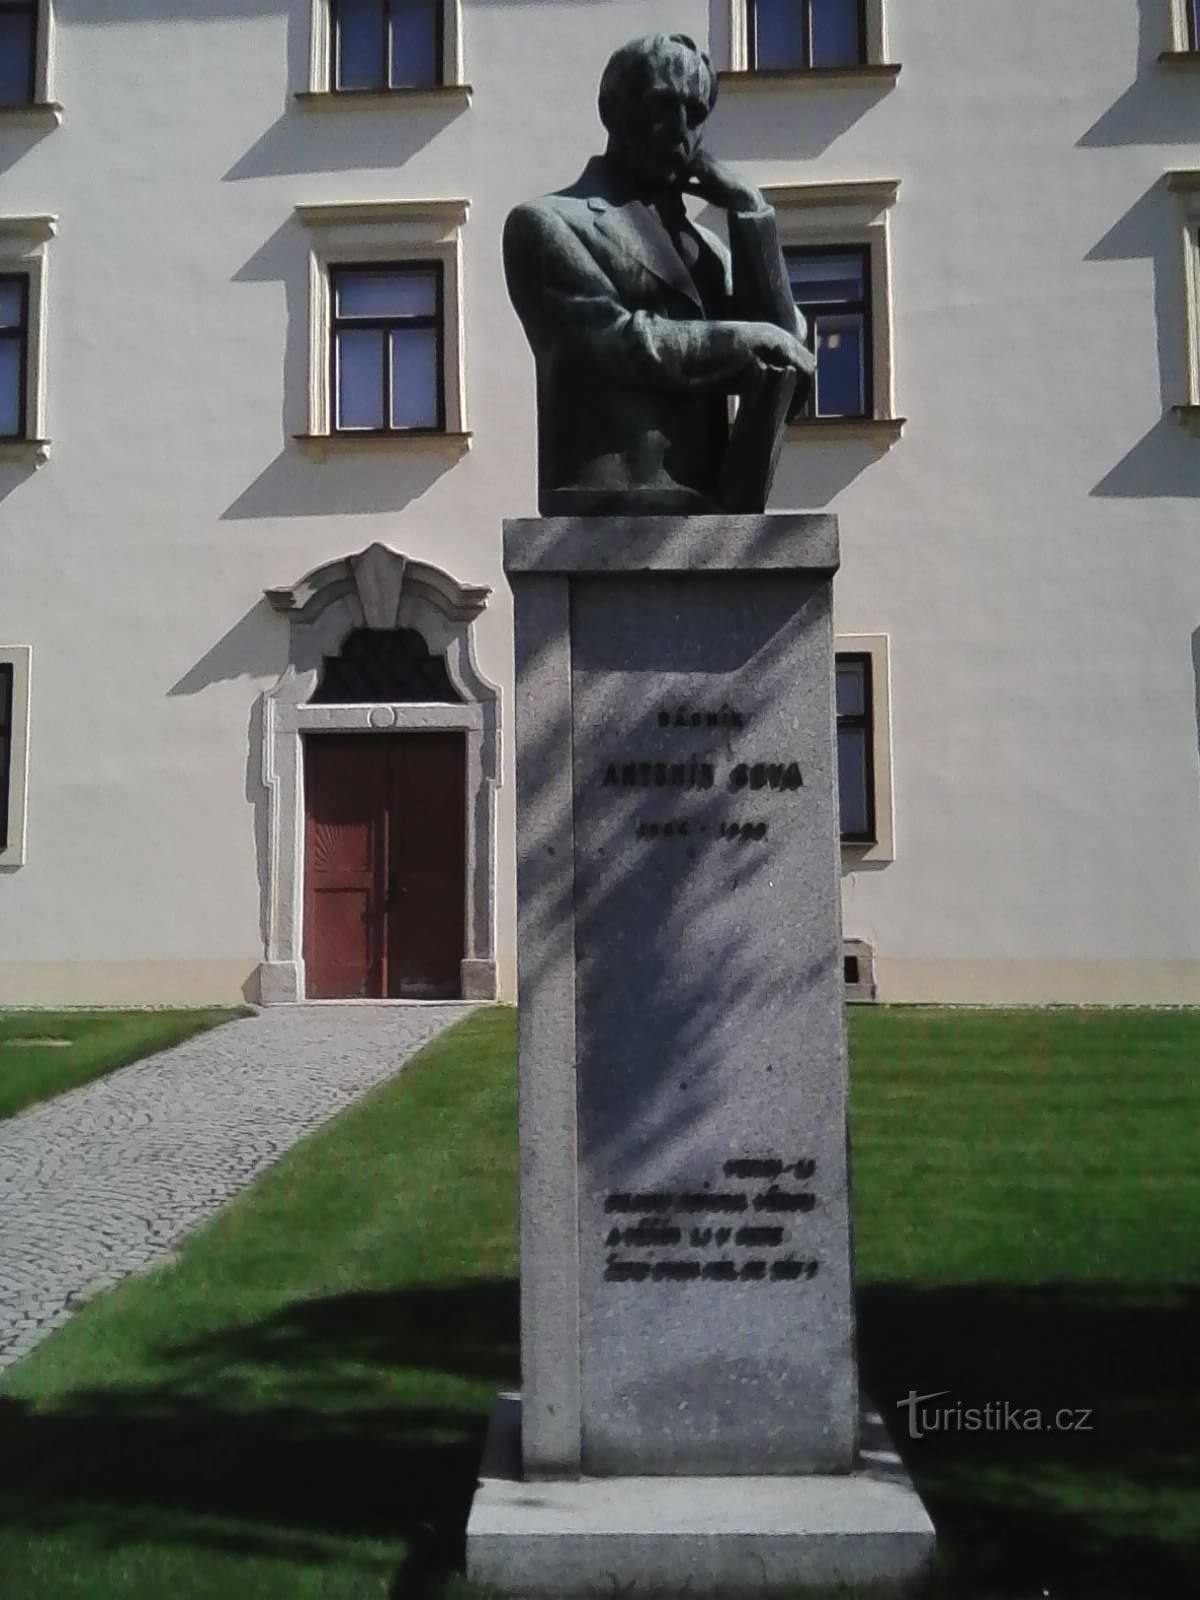 1. The statue of an important Czech poet and novelist stands by the Pacov castle, in which